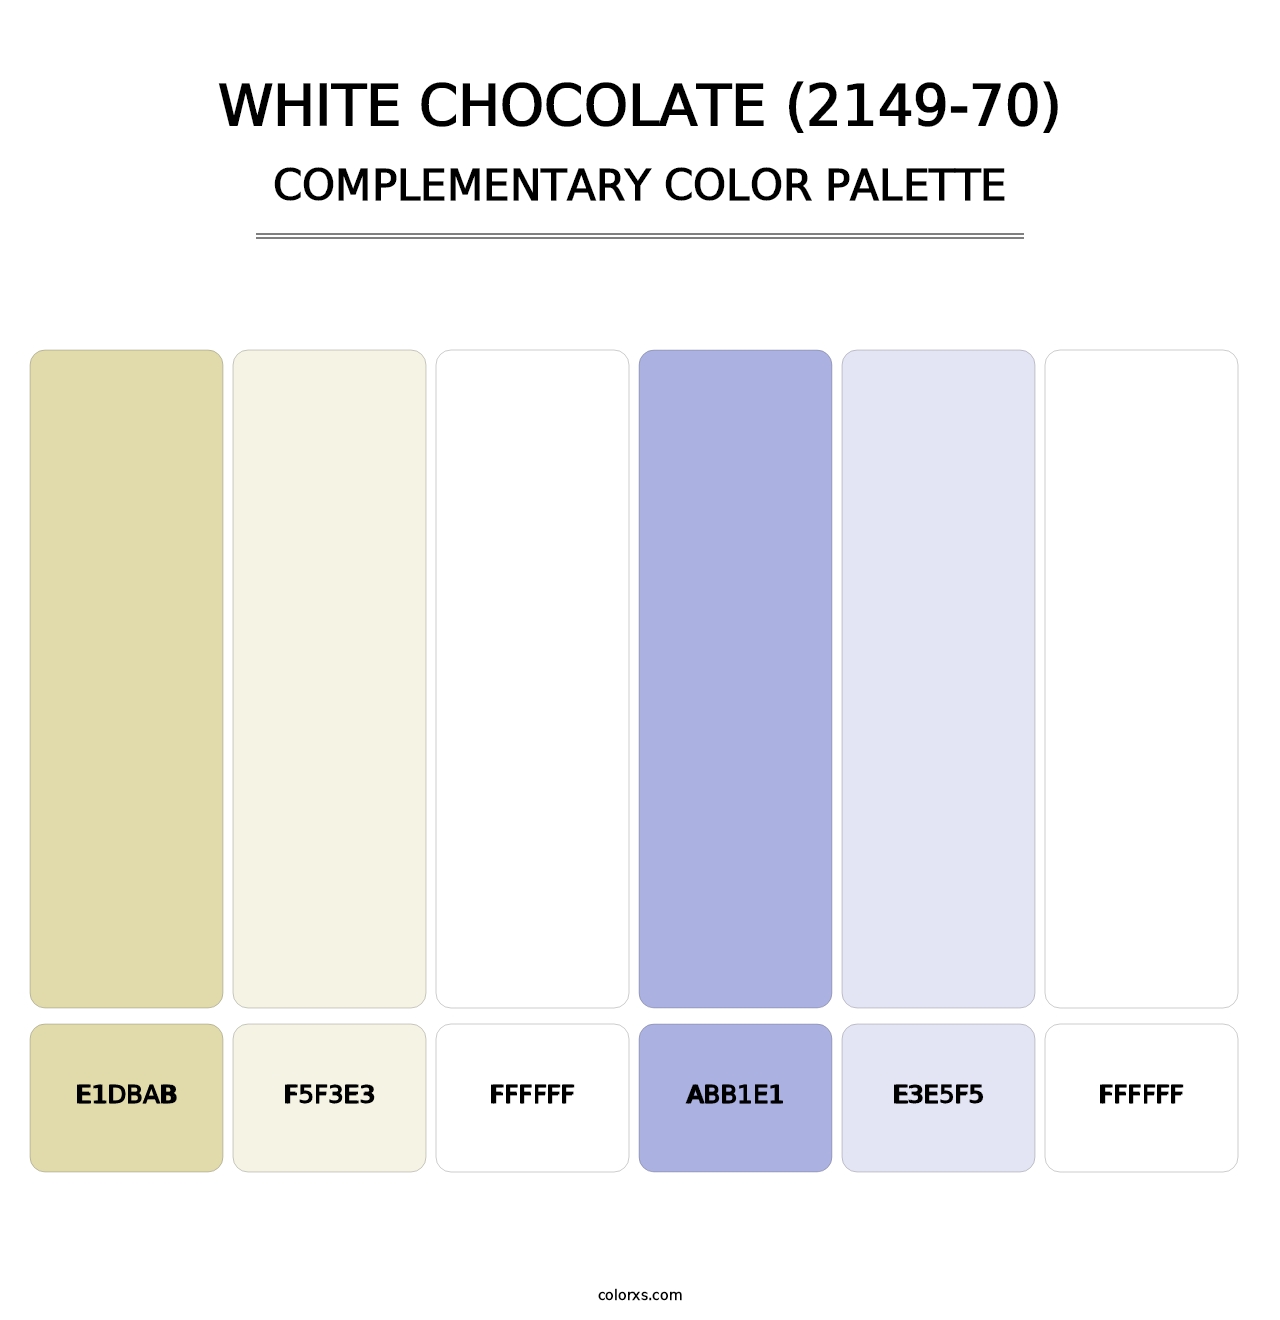 White Chocolate (2149-70) - Complementary Color Palette